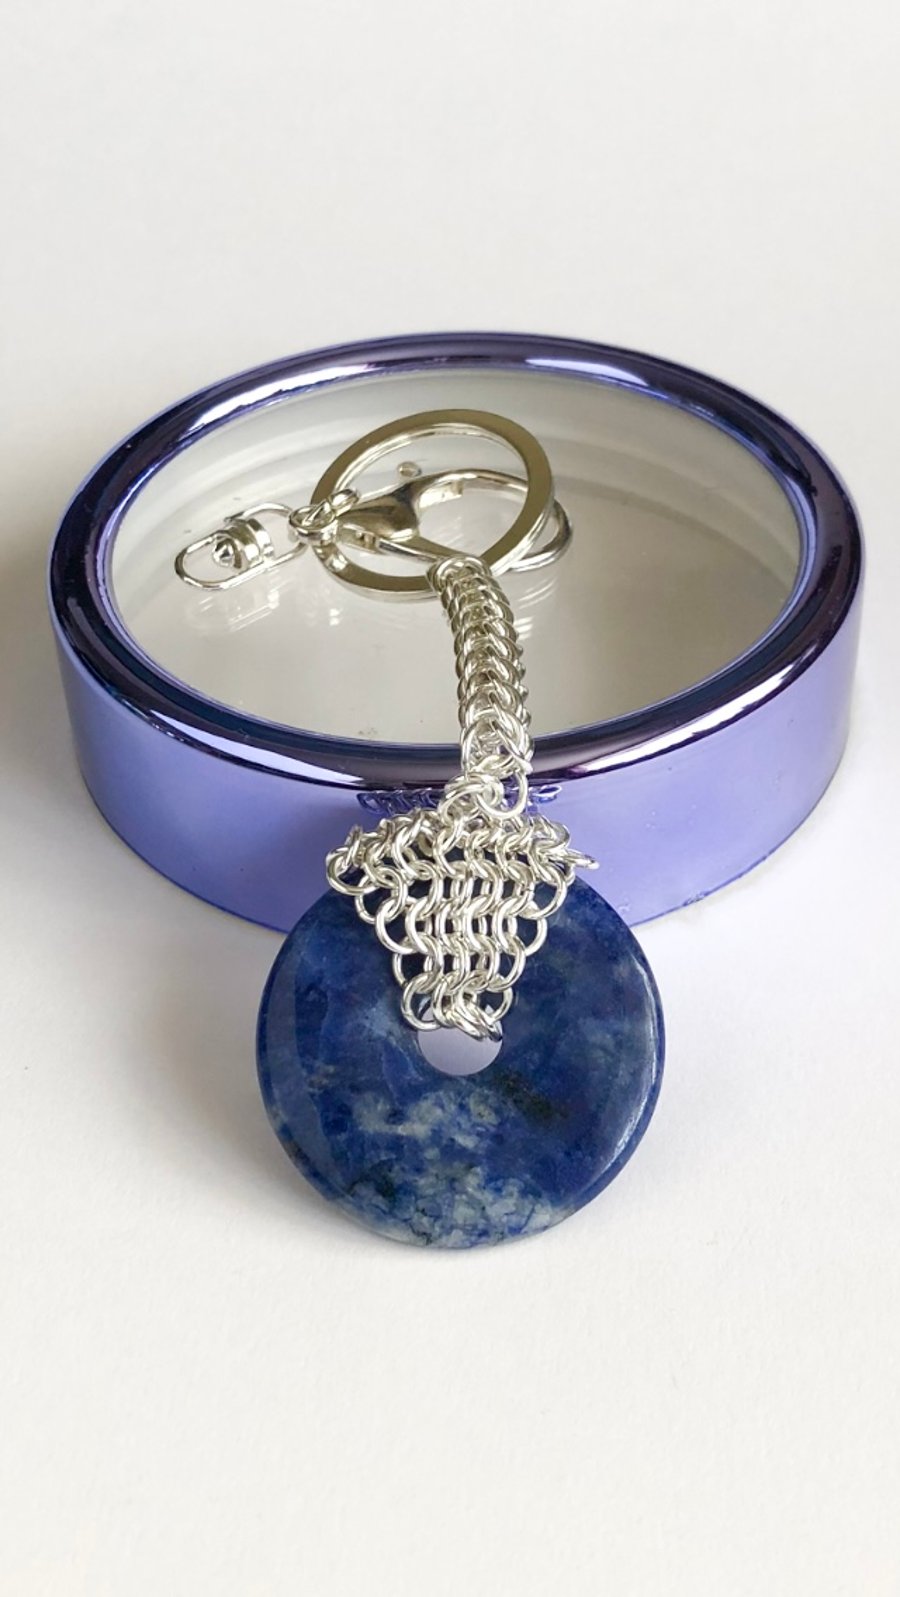 Sodalite Donut Handbag Charm with Chainmaille Chain and Keyring